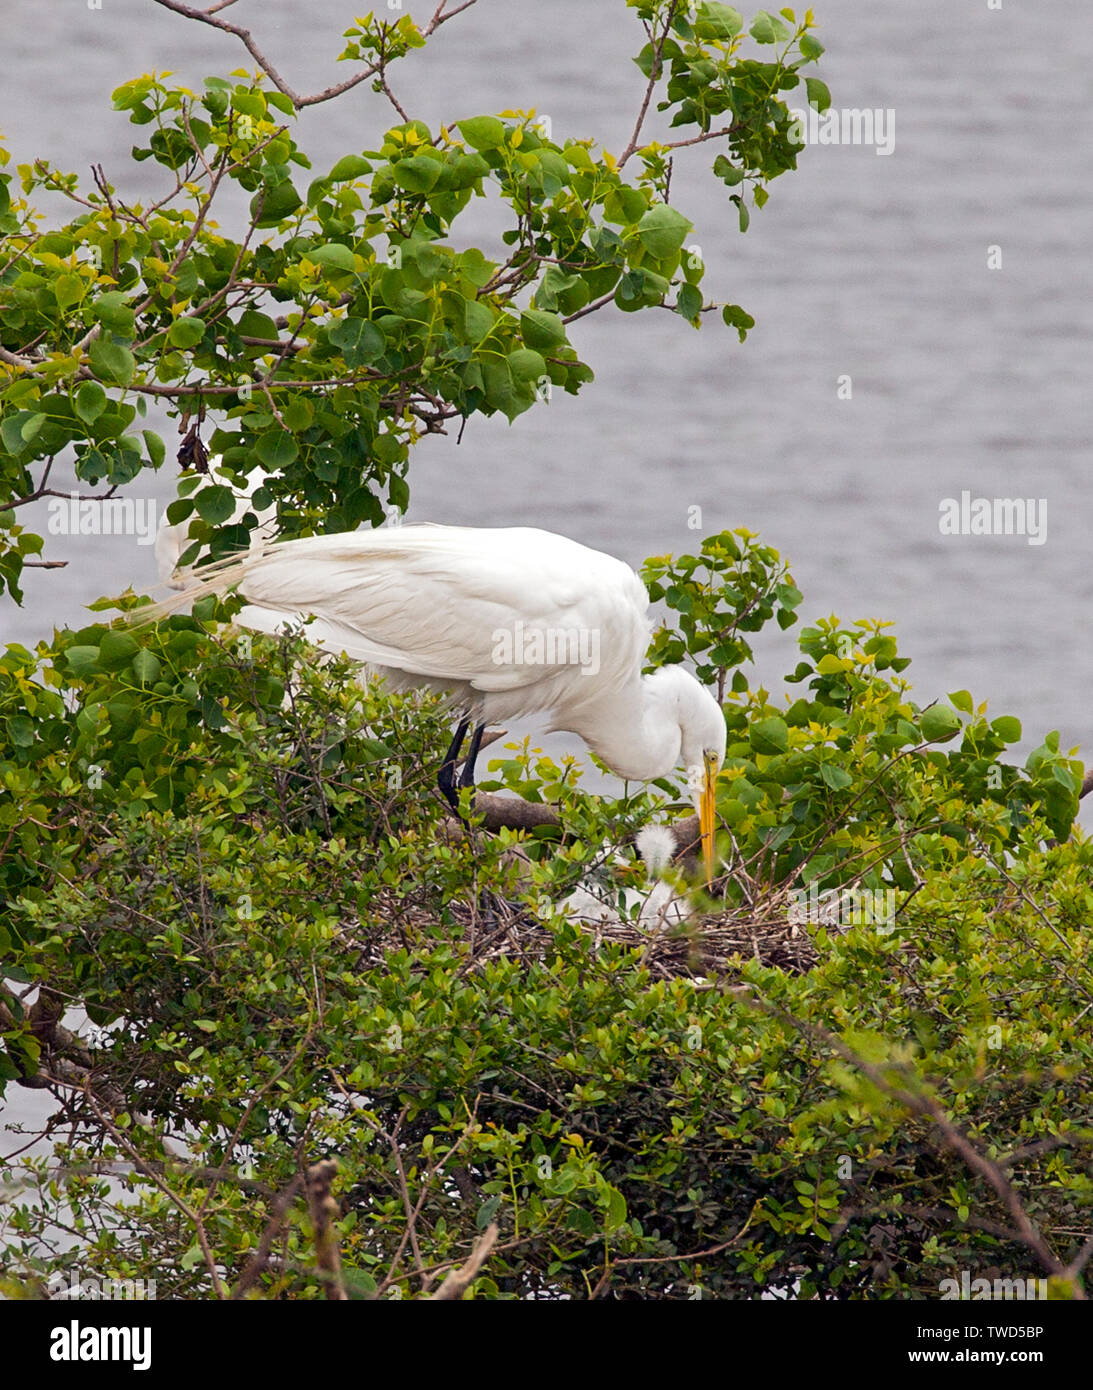 A Great (Common) Egret approaches her chicks in a protected natural rookery, Smith Oaks Bird Sanctuary, High Island, Texas. Stock Photo